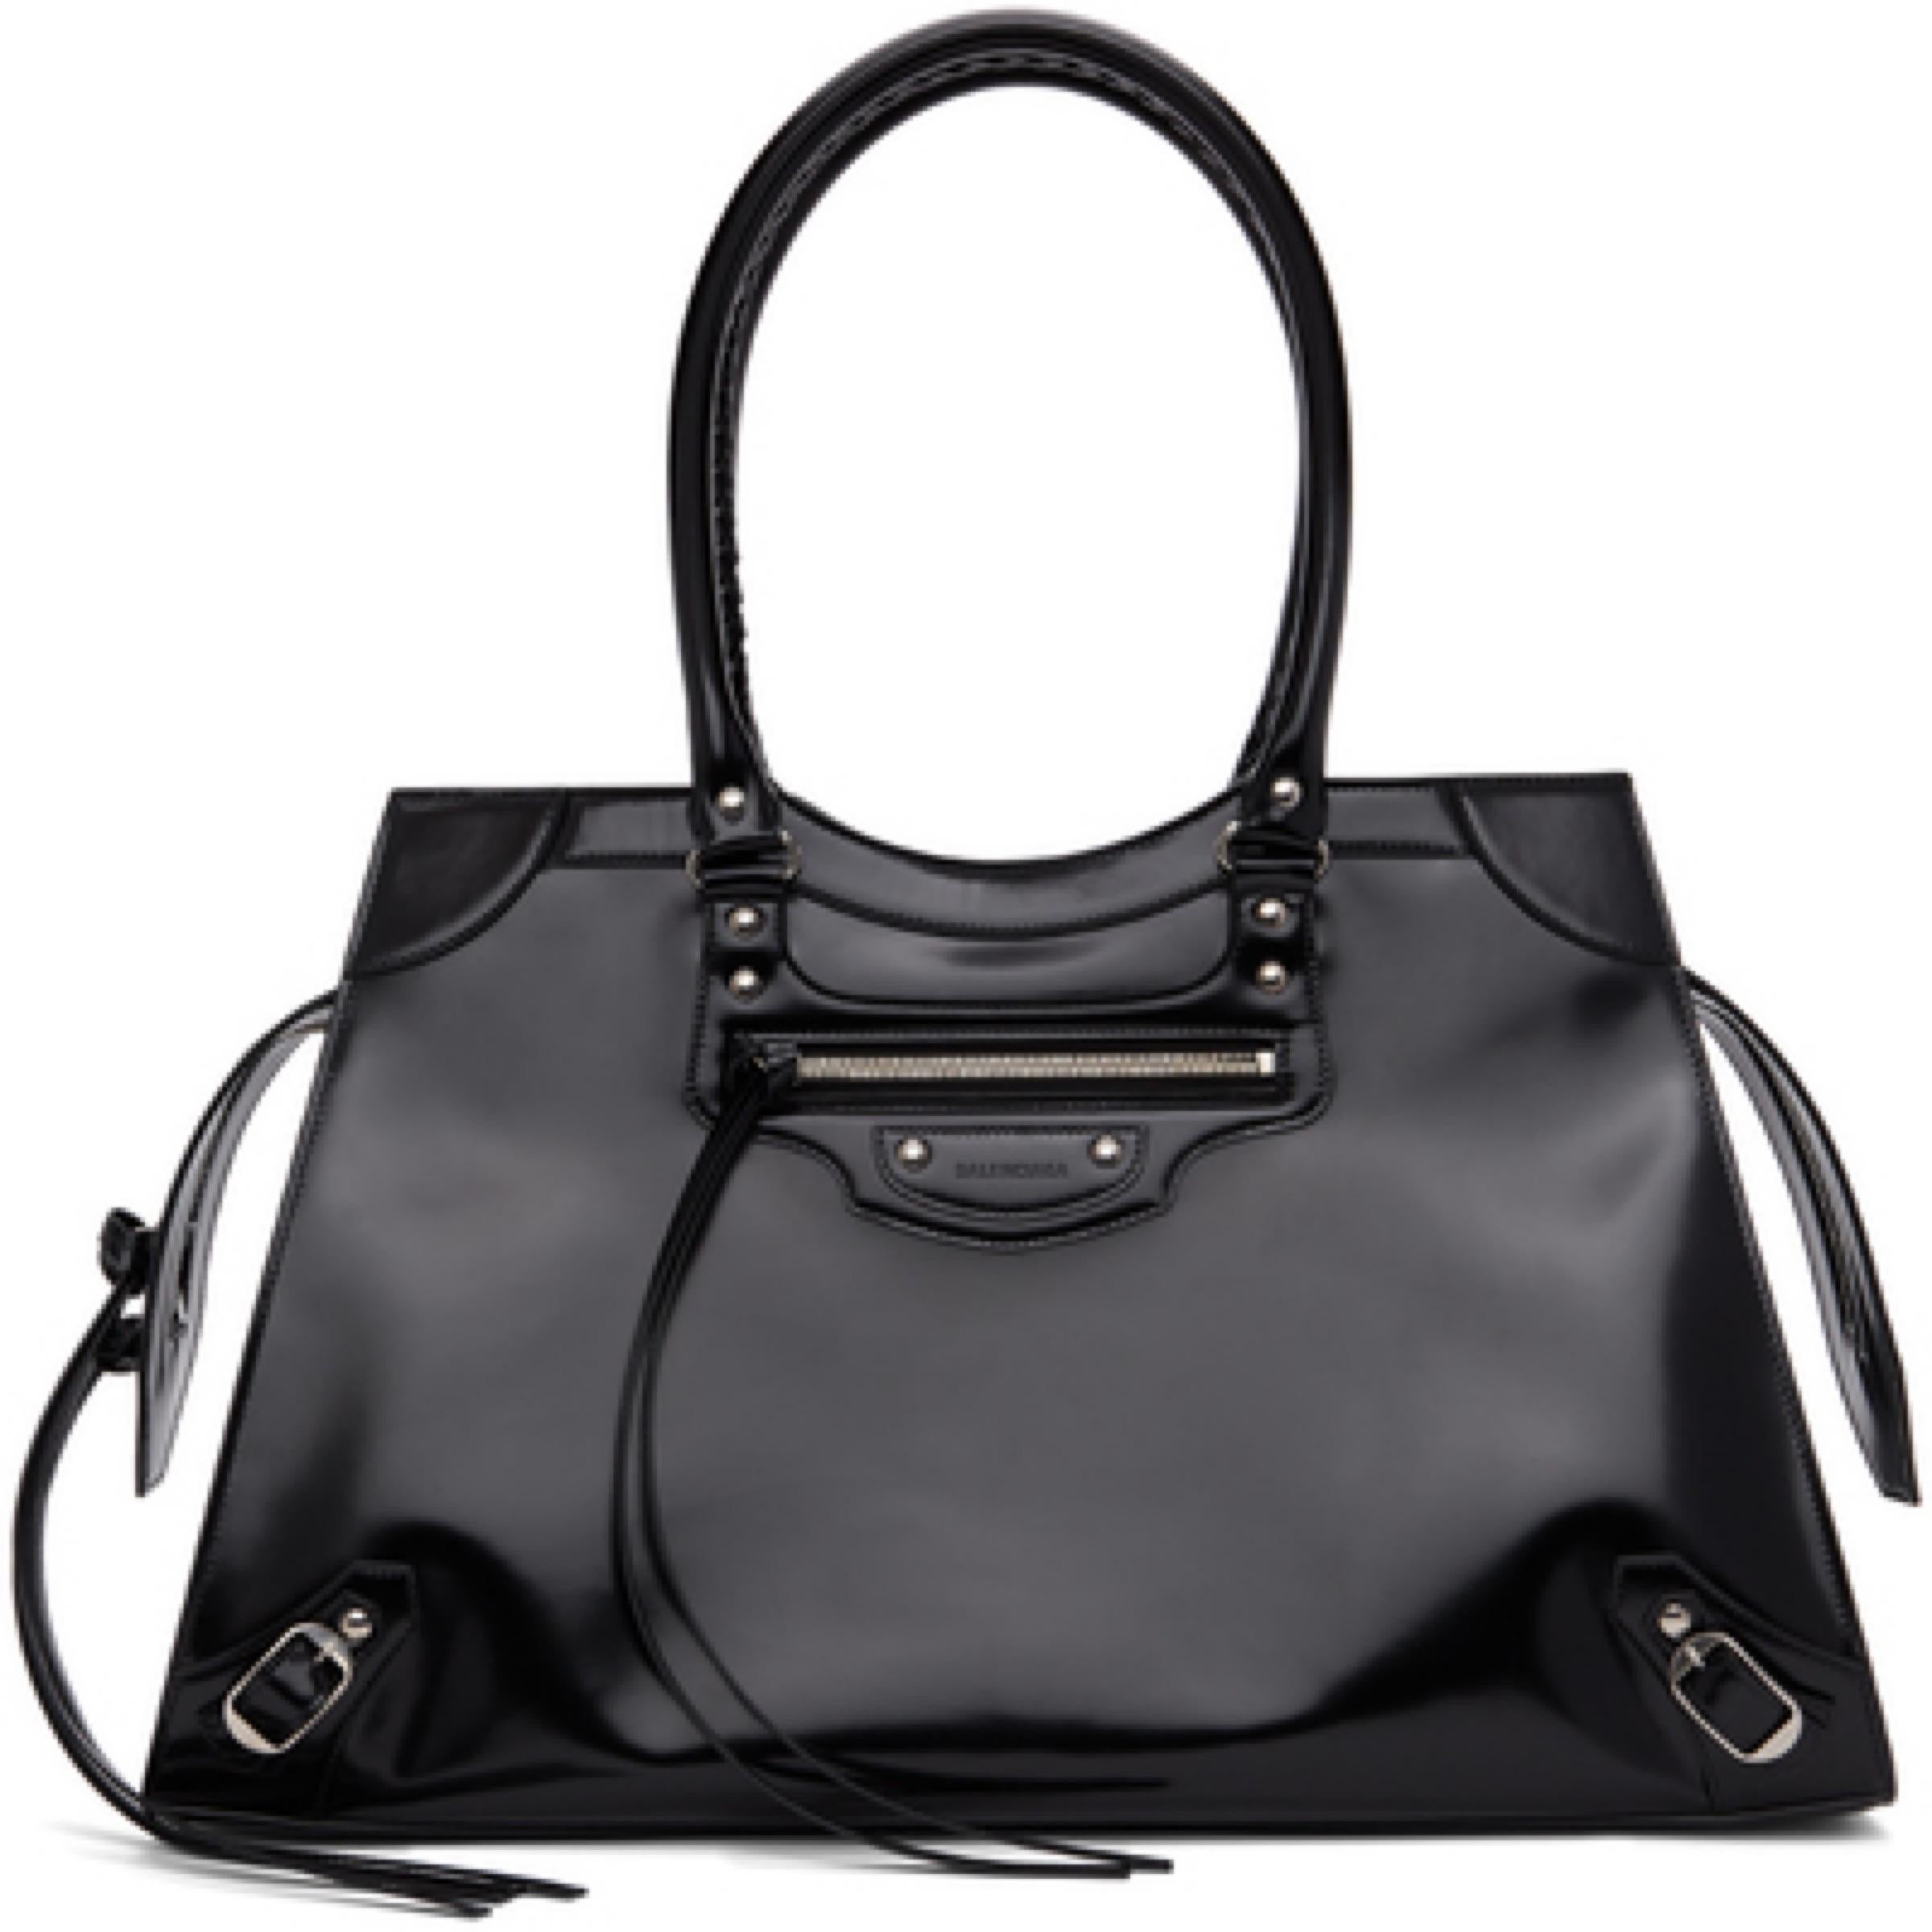 New Balenciaga Black Large Neo Classic City Leather Shoulder Bag

Authenticity Guaranteed

DETAILS
Brand: Balenciaga
Condition: Brand new
Gender: Women
Category: Shoulder bag
Color: Black
Material: Leather
Silver-tone hardware
Top handles
Top zip